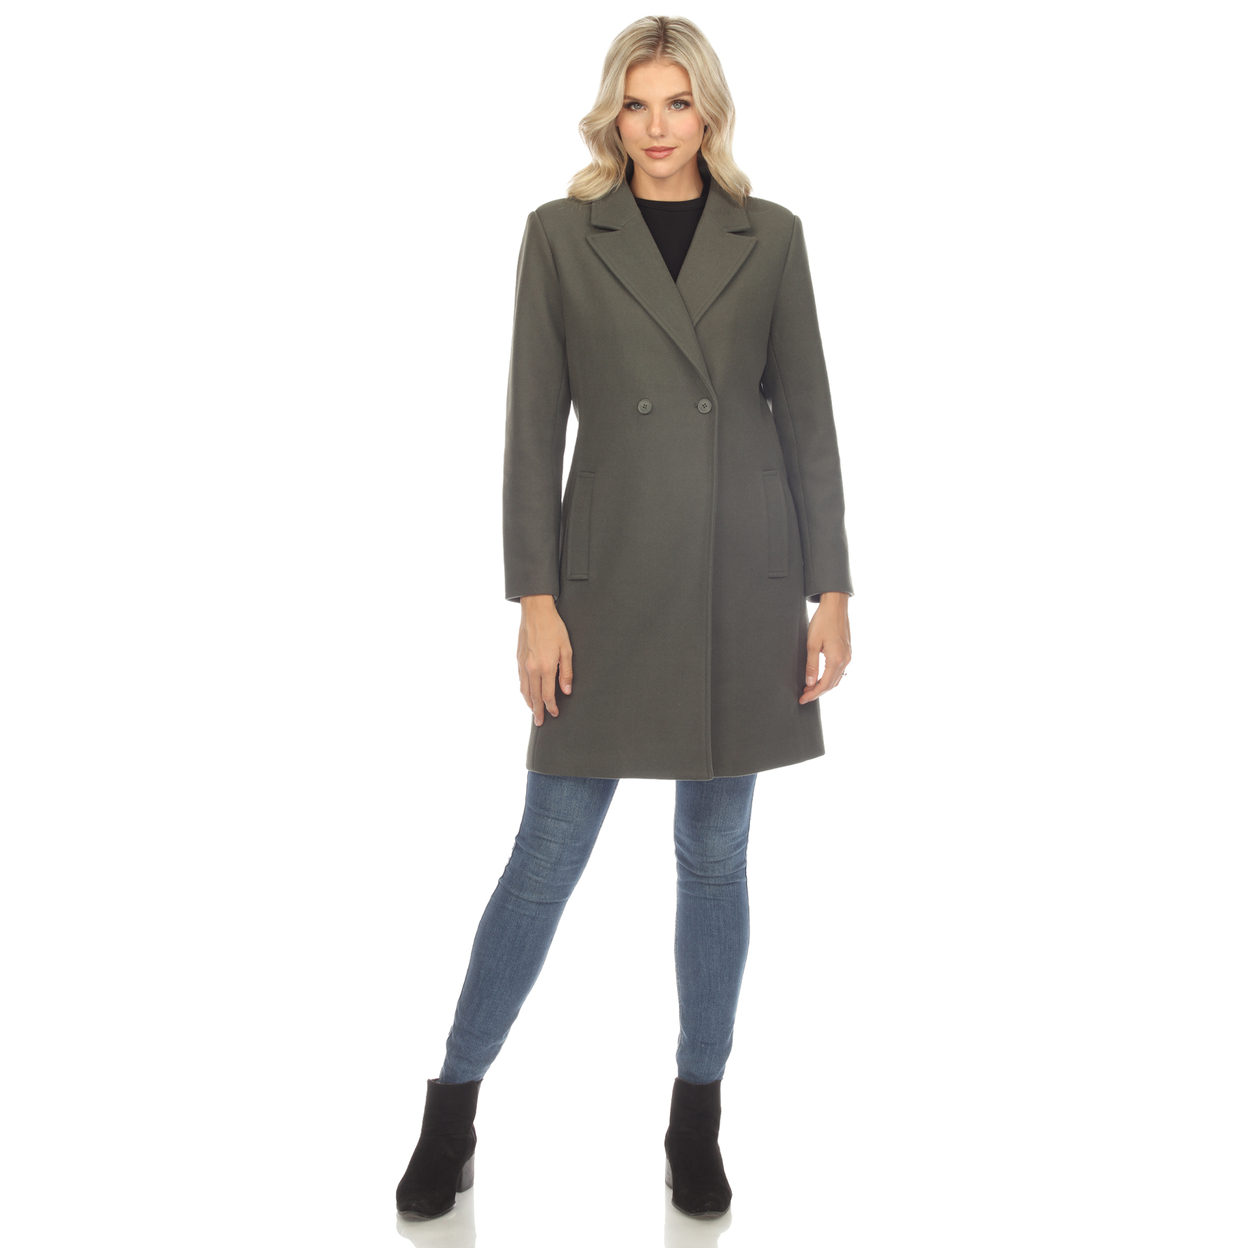 White Mark Women's Long Sleeve Classic Double-Breasted Walker Coat - Olive, Large